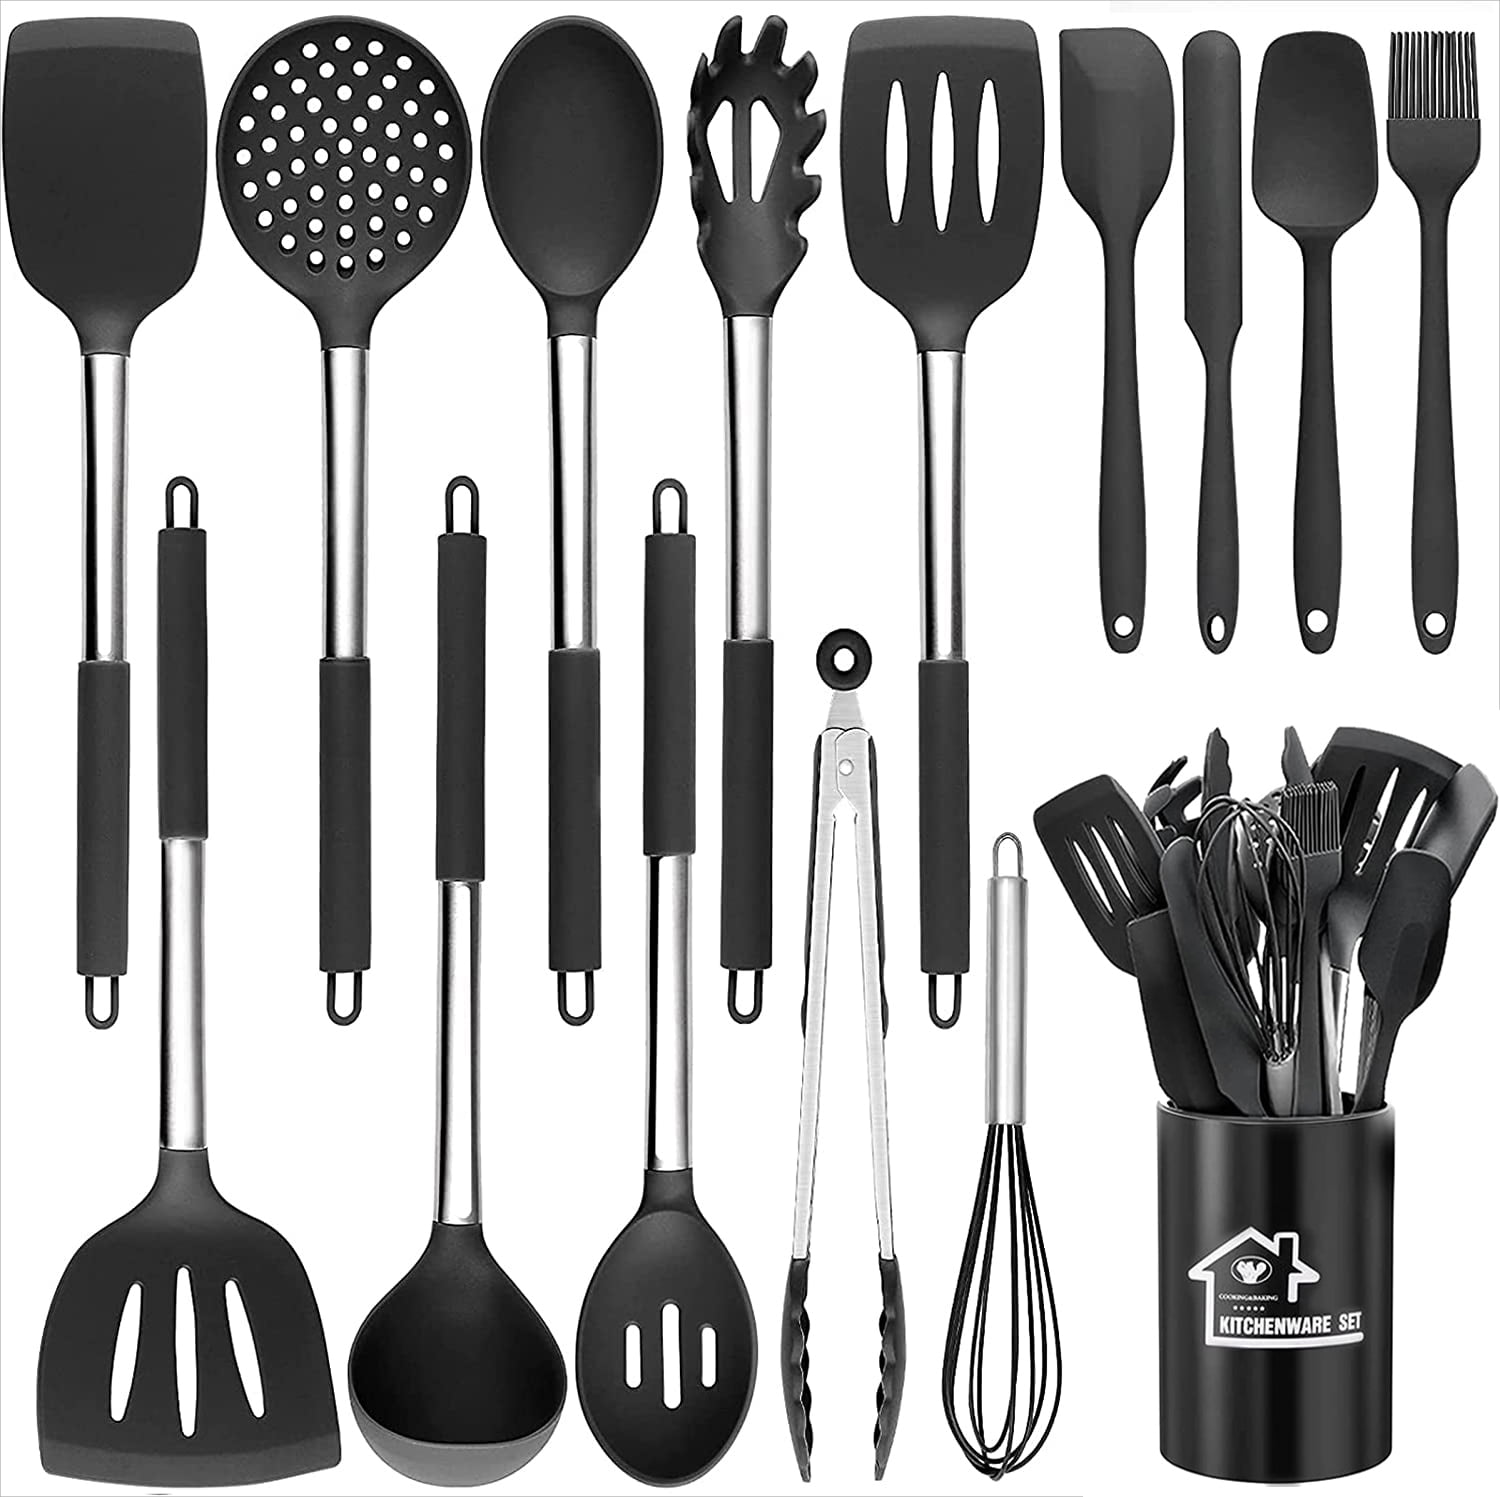  P&P CHEF Kitchen Utensils Set (20Pcs), Black Cooking Utensil  Kit Heat-resistant Silicone Cookware with Stainless Steel Handles, Non-stick  & Non-toxic, Heavy Duty & Dishwasher Safe : Everything Else